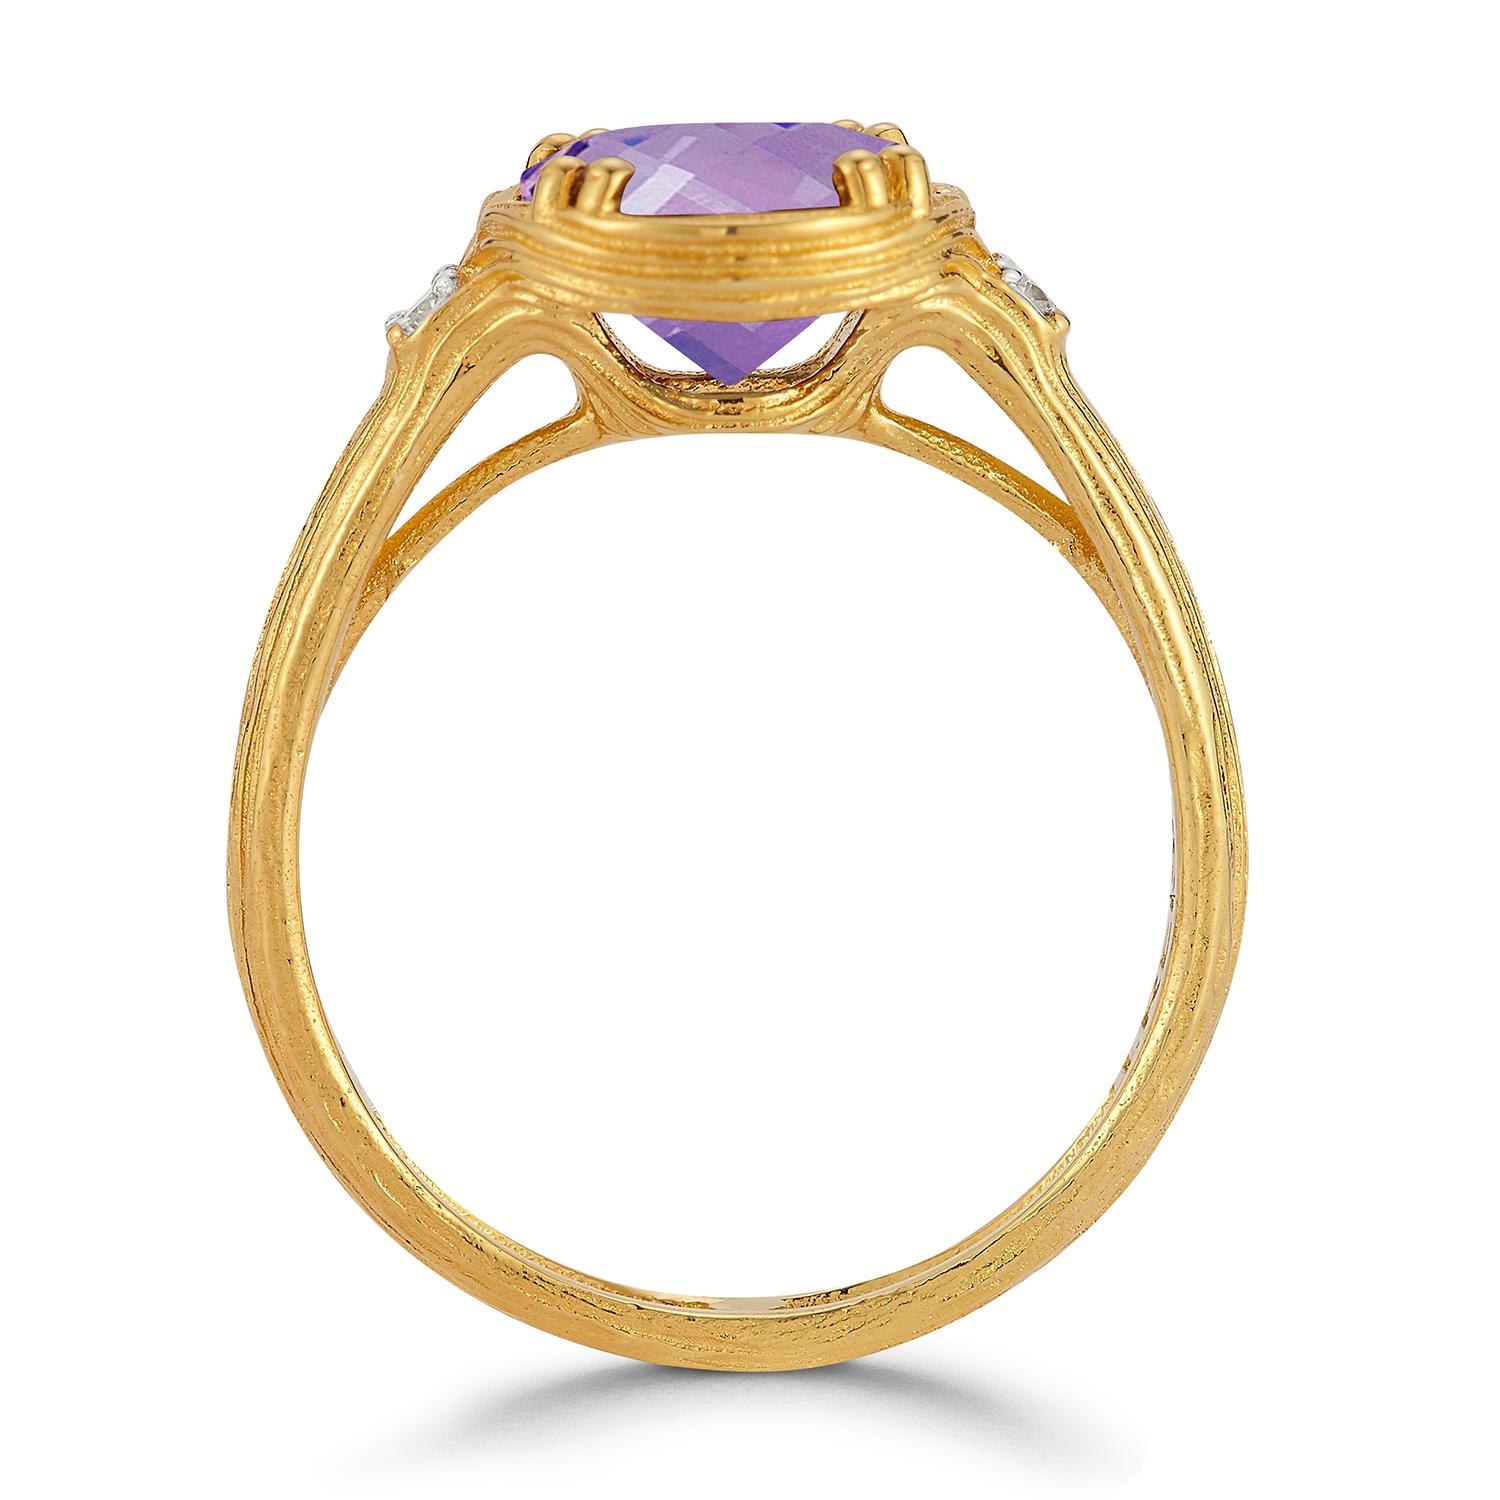 For Sale:  Hand-Crafted 14K Gold 0.05 ct. tw. Diamond & 1.75CT Amethyst Cocktail Ring 4